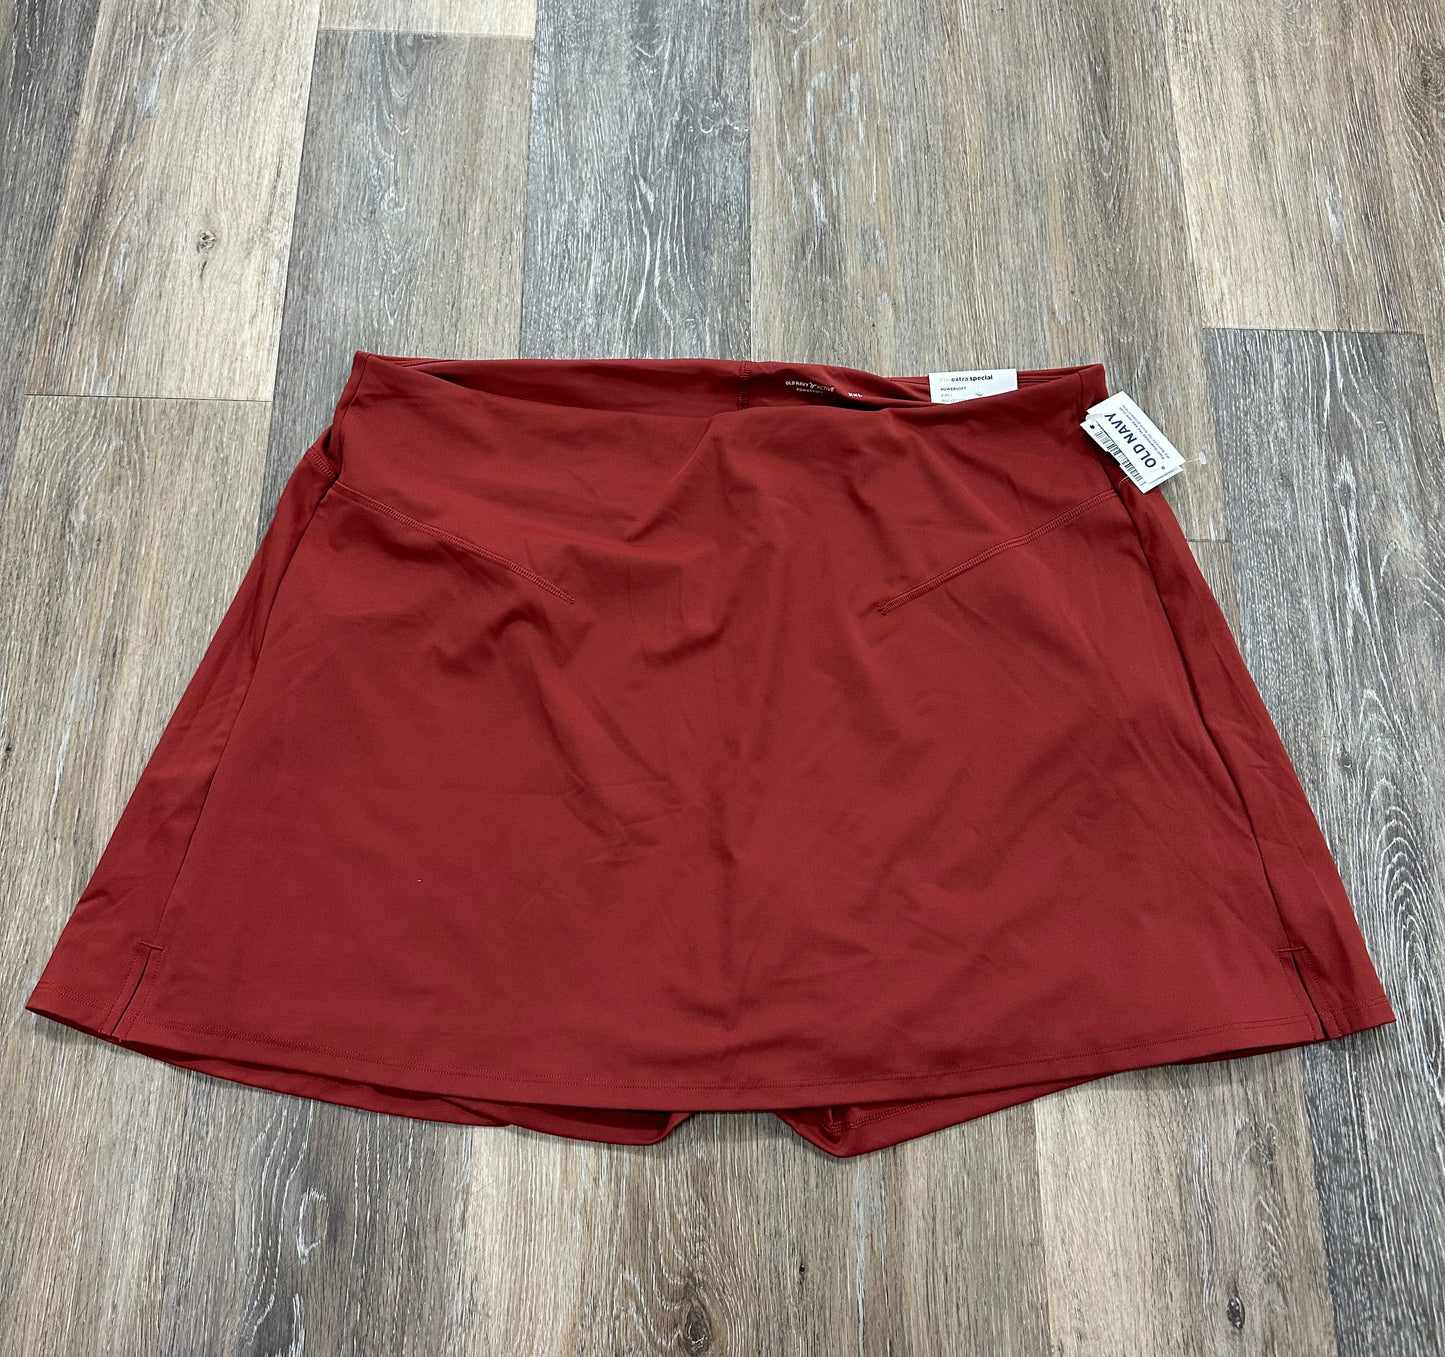 Athletic Skirt Skort By Old Navy  Size: 2x